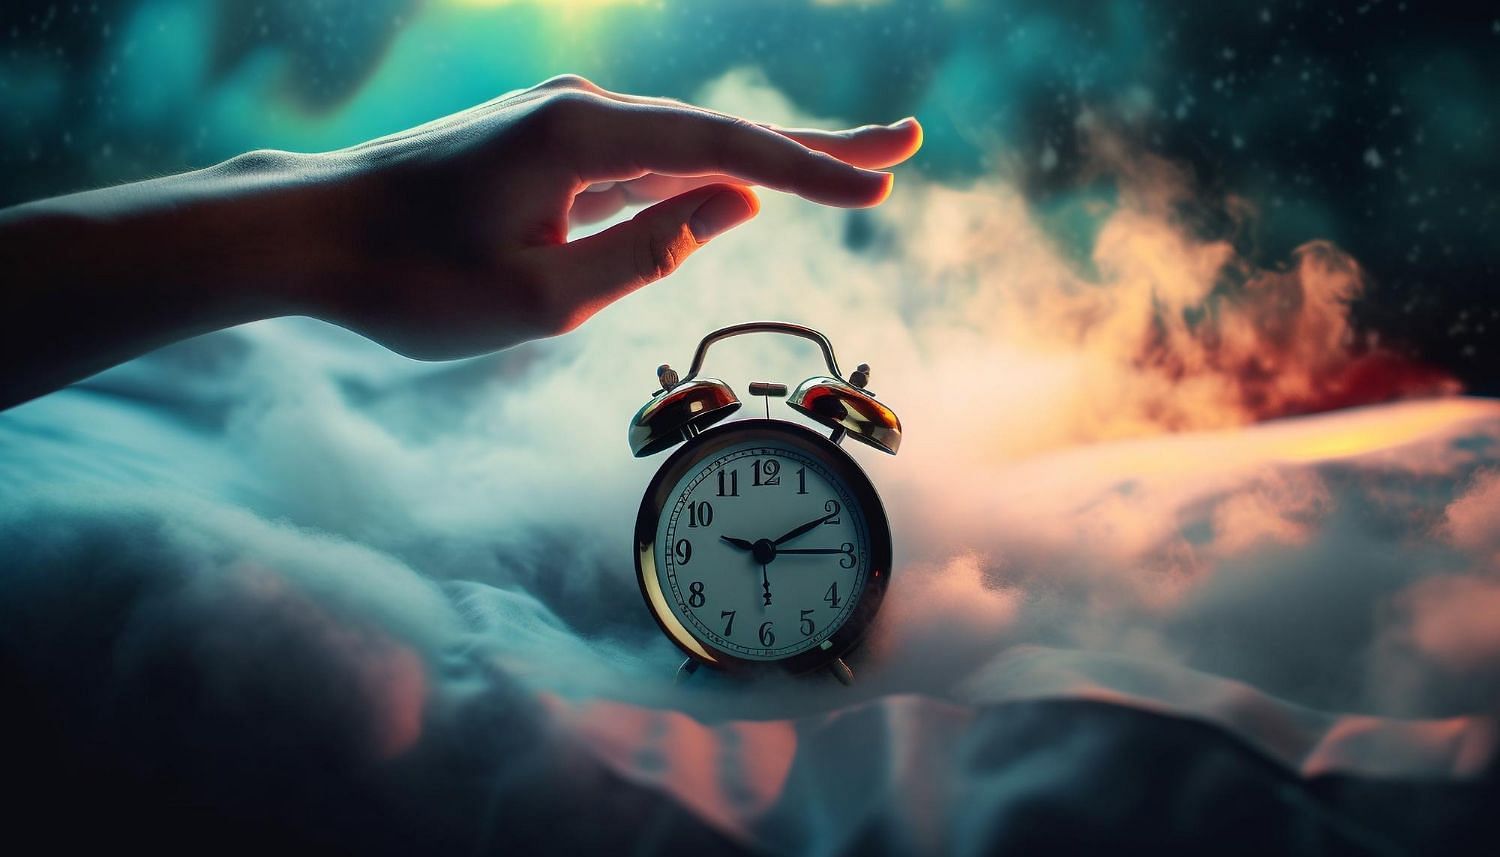 If you could turn back the time, what would you want to talk about? (Image via Freepik/Vecstock)